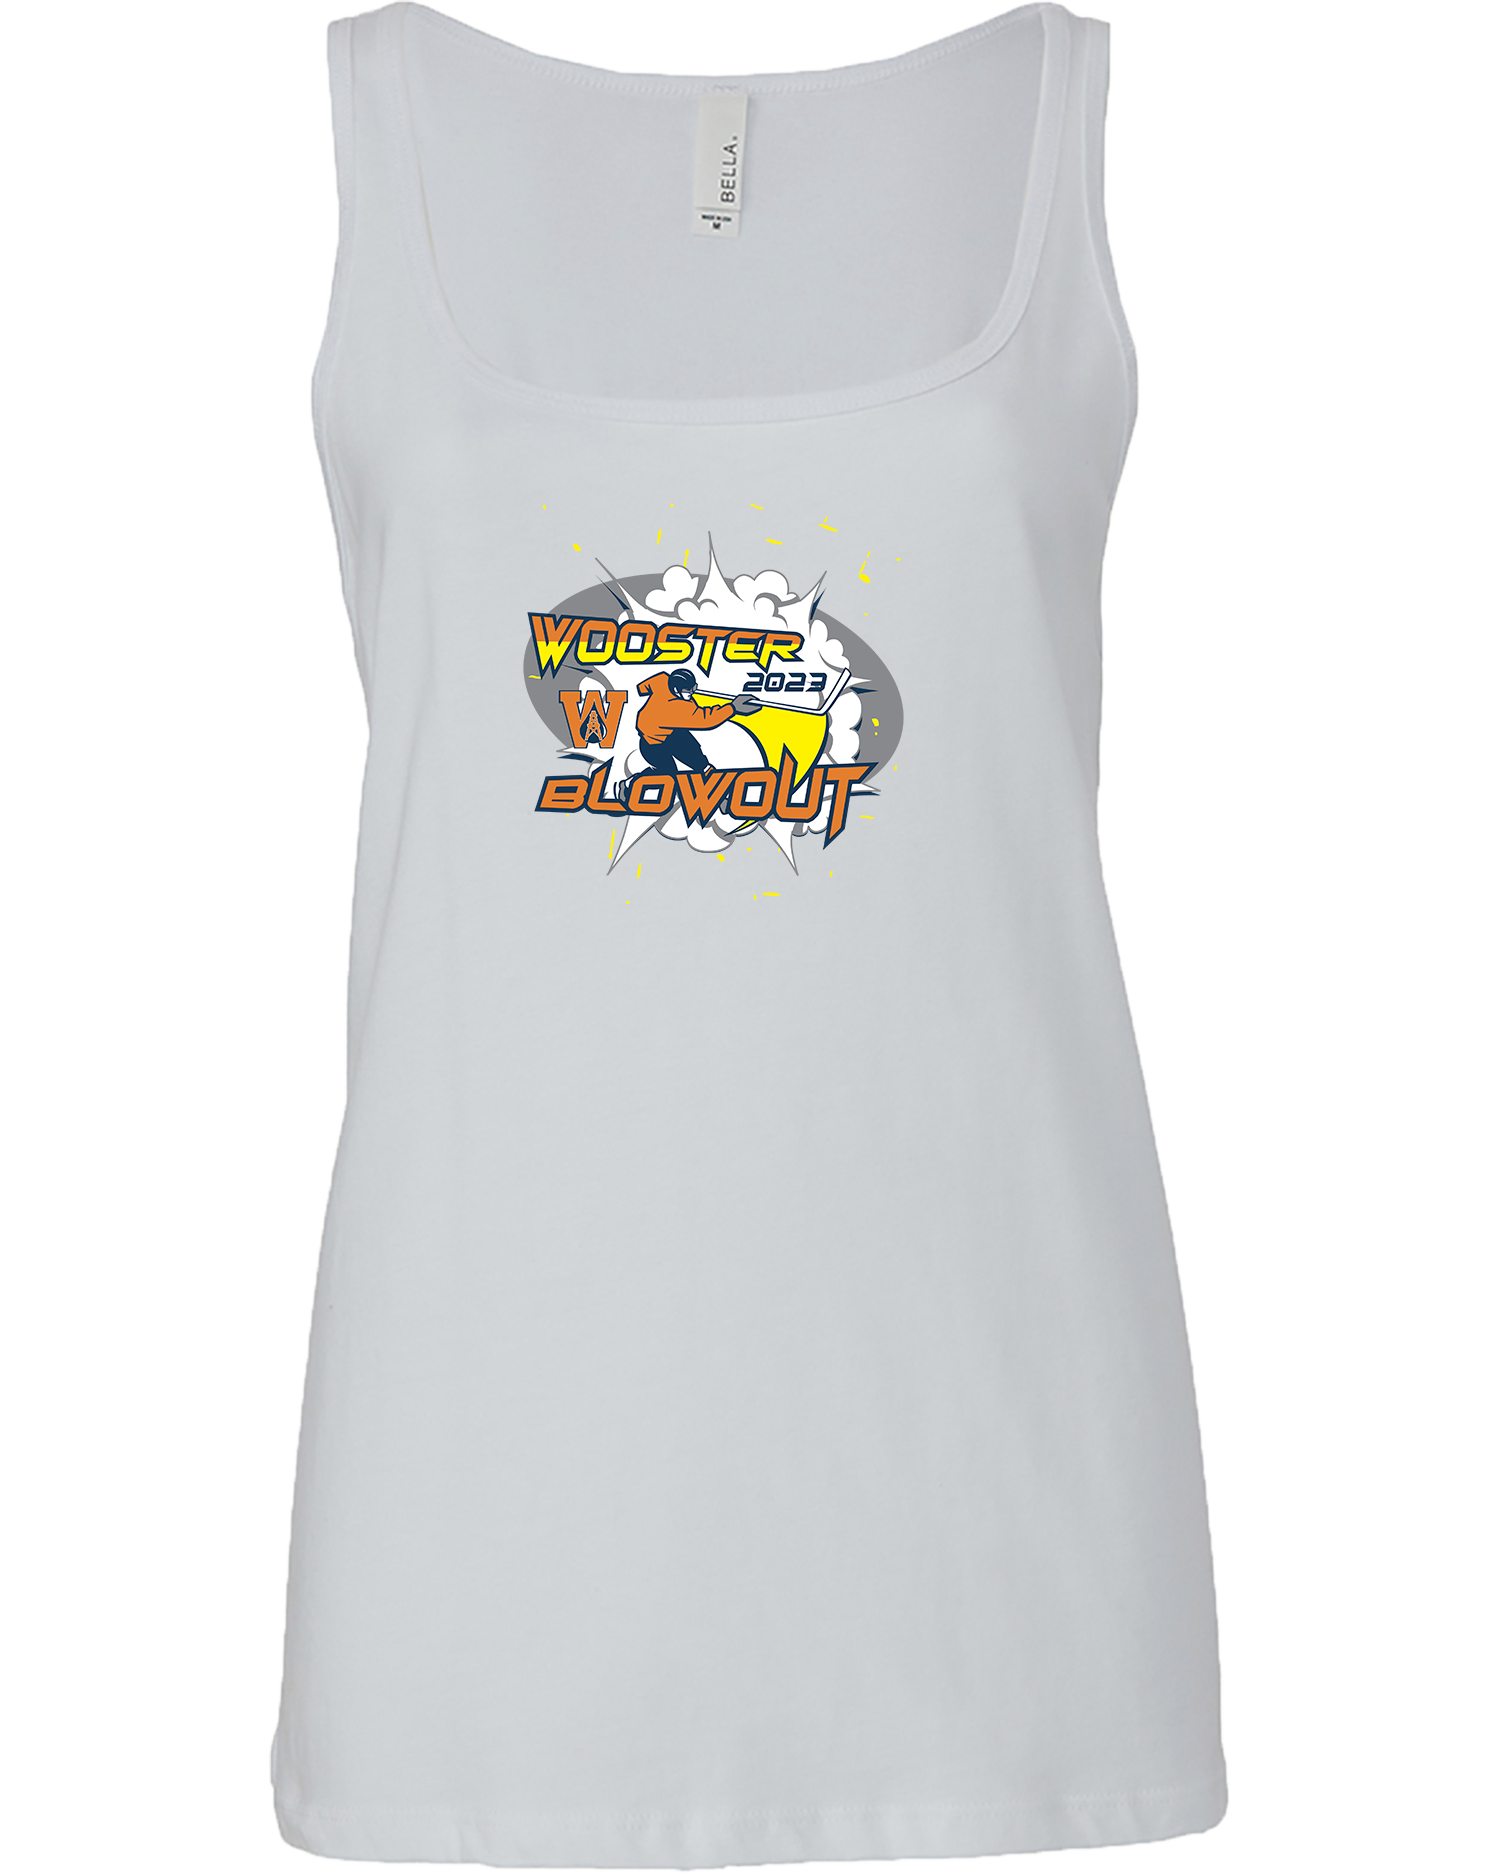 TANK TOP - 2023 Wooster Blowout